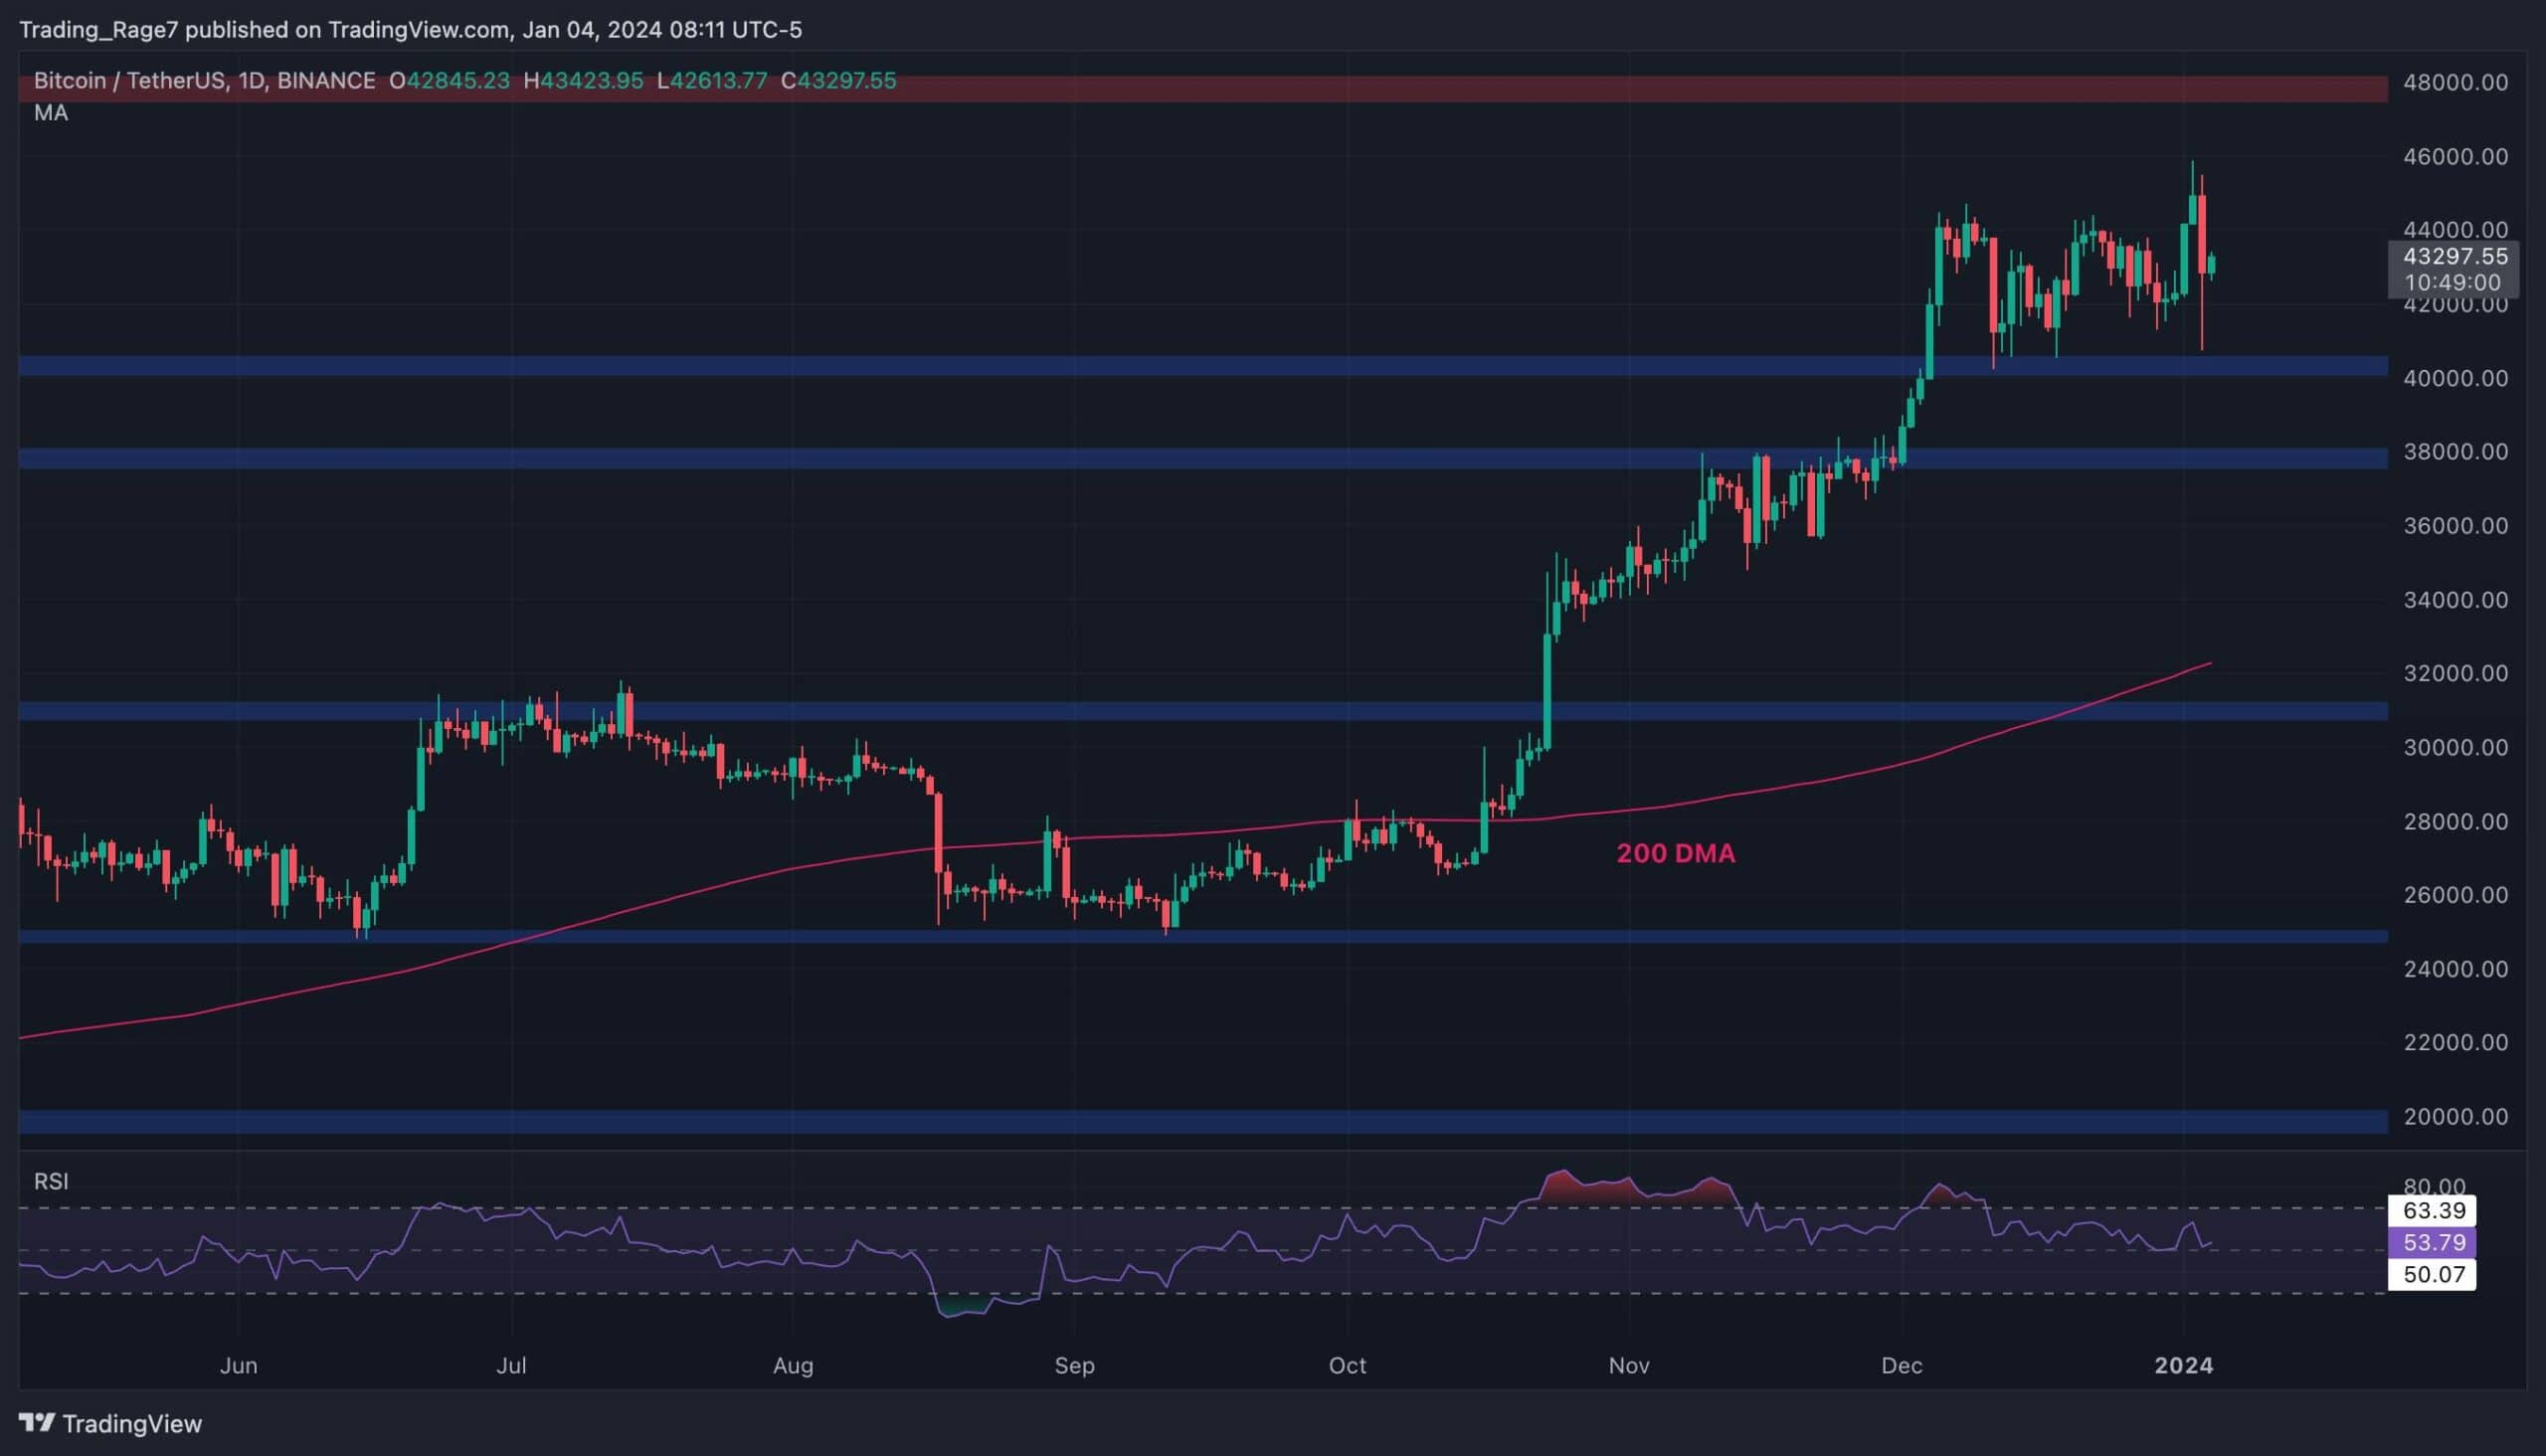 Quick Flush or a Sign of Deeper Correction for BTC: Yesterday’s Crash In-Depth (Bitcoin Price Analysis)